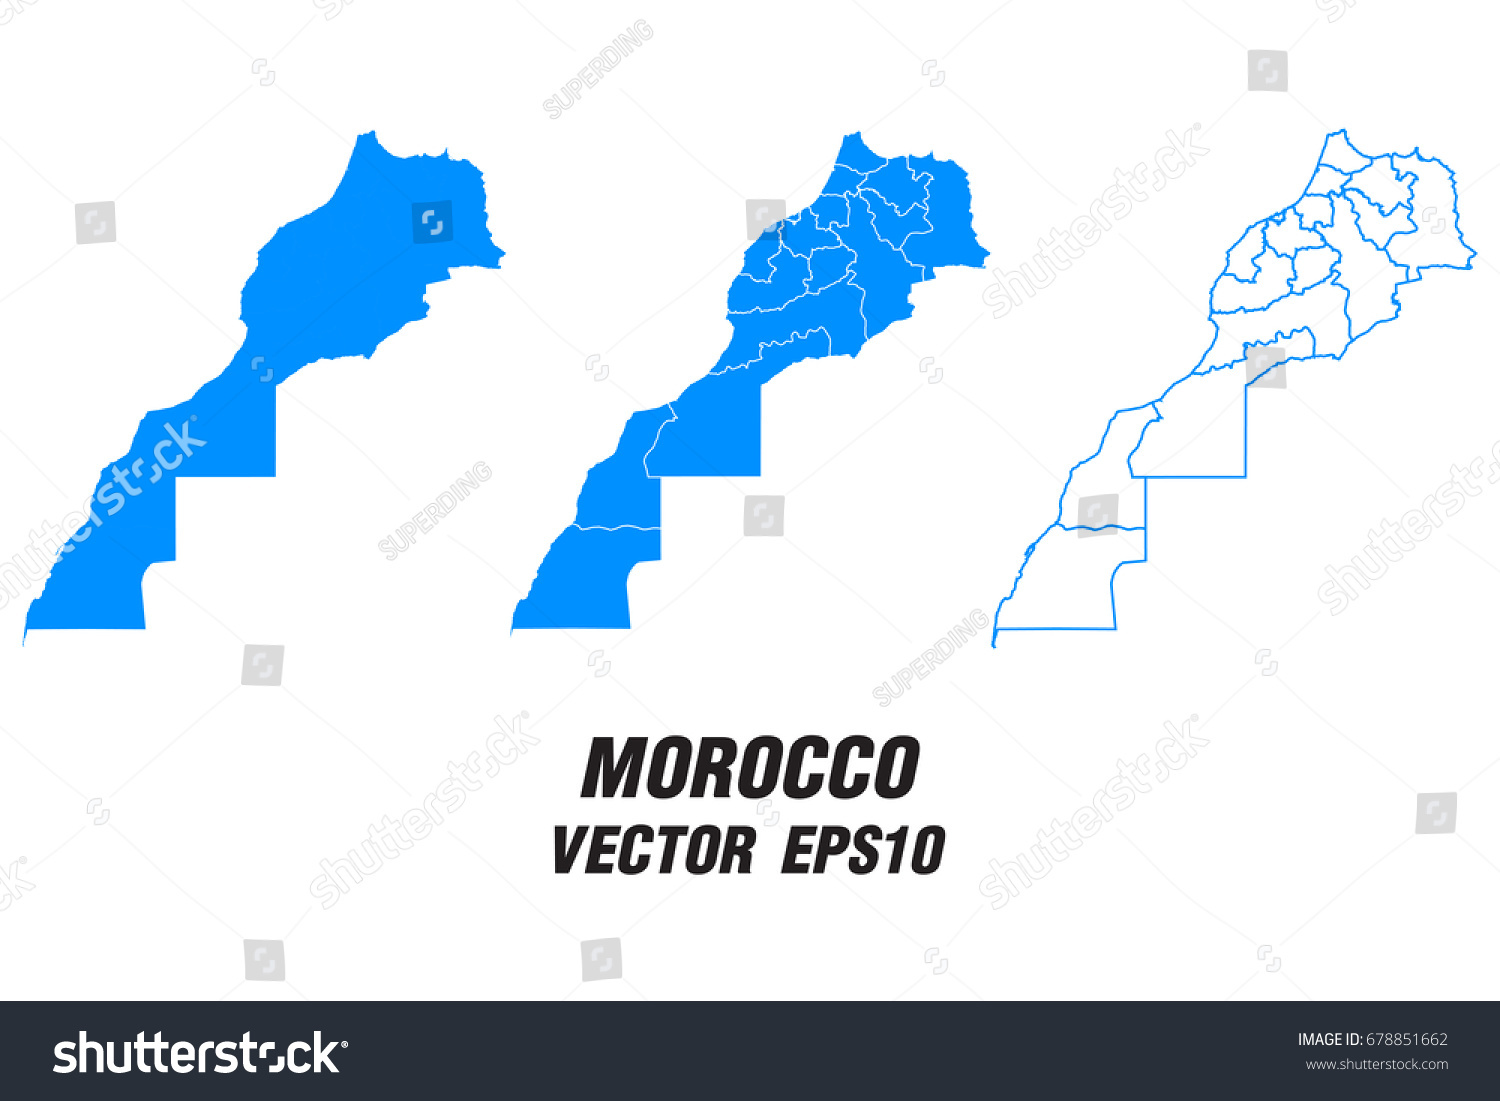 Set Vector Maps Vector Map Of Moroccovector Royalty Free Stock Vector 678851662 3479